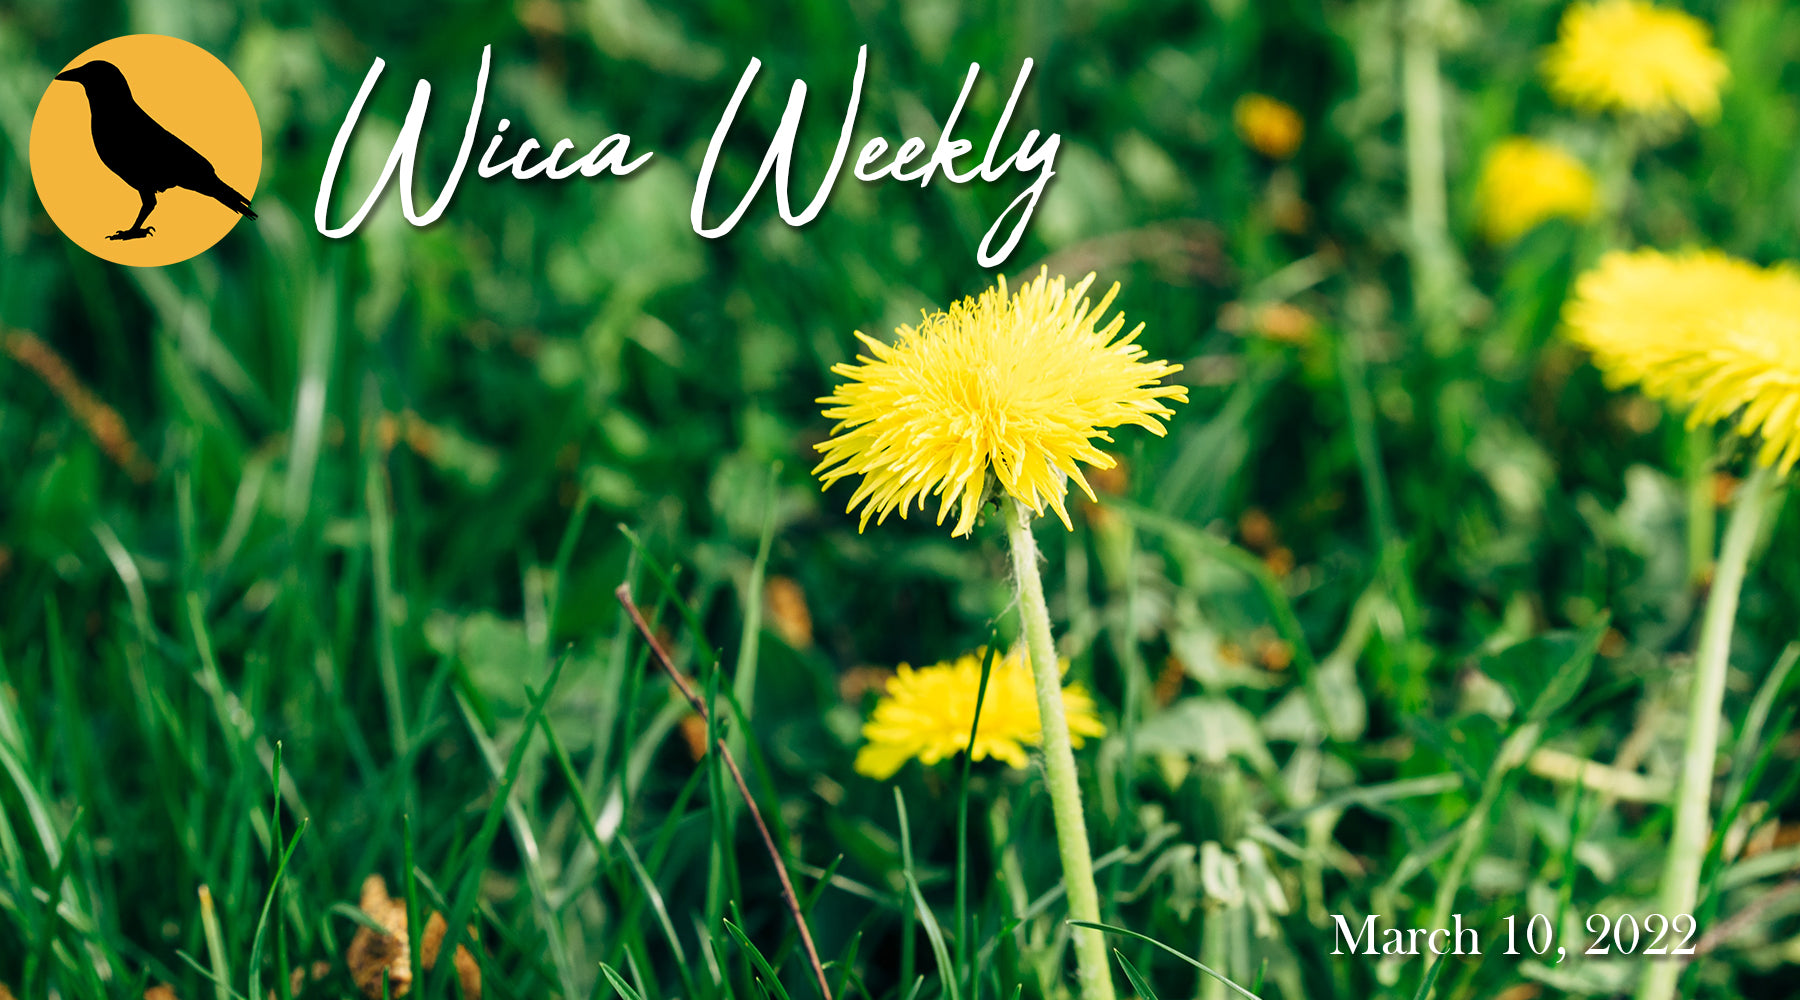 Wicca Weekly: March 17, 2022